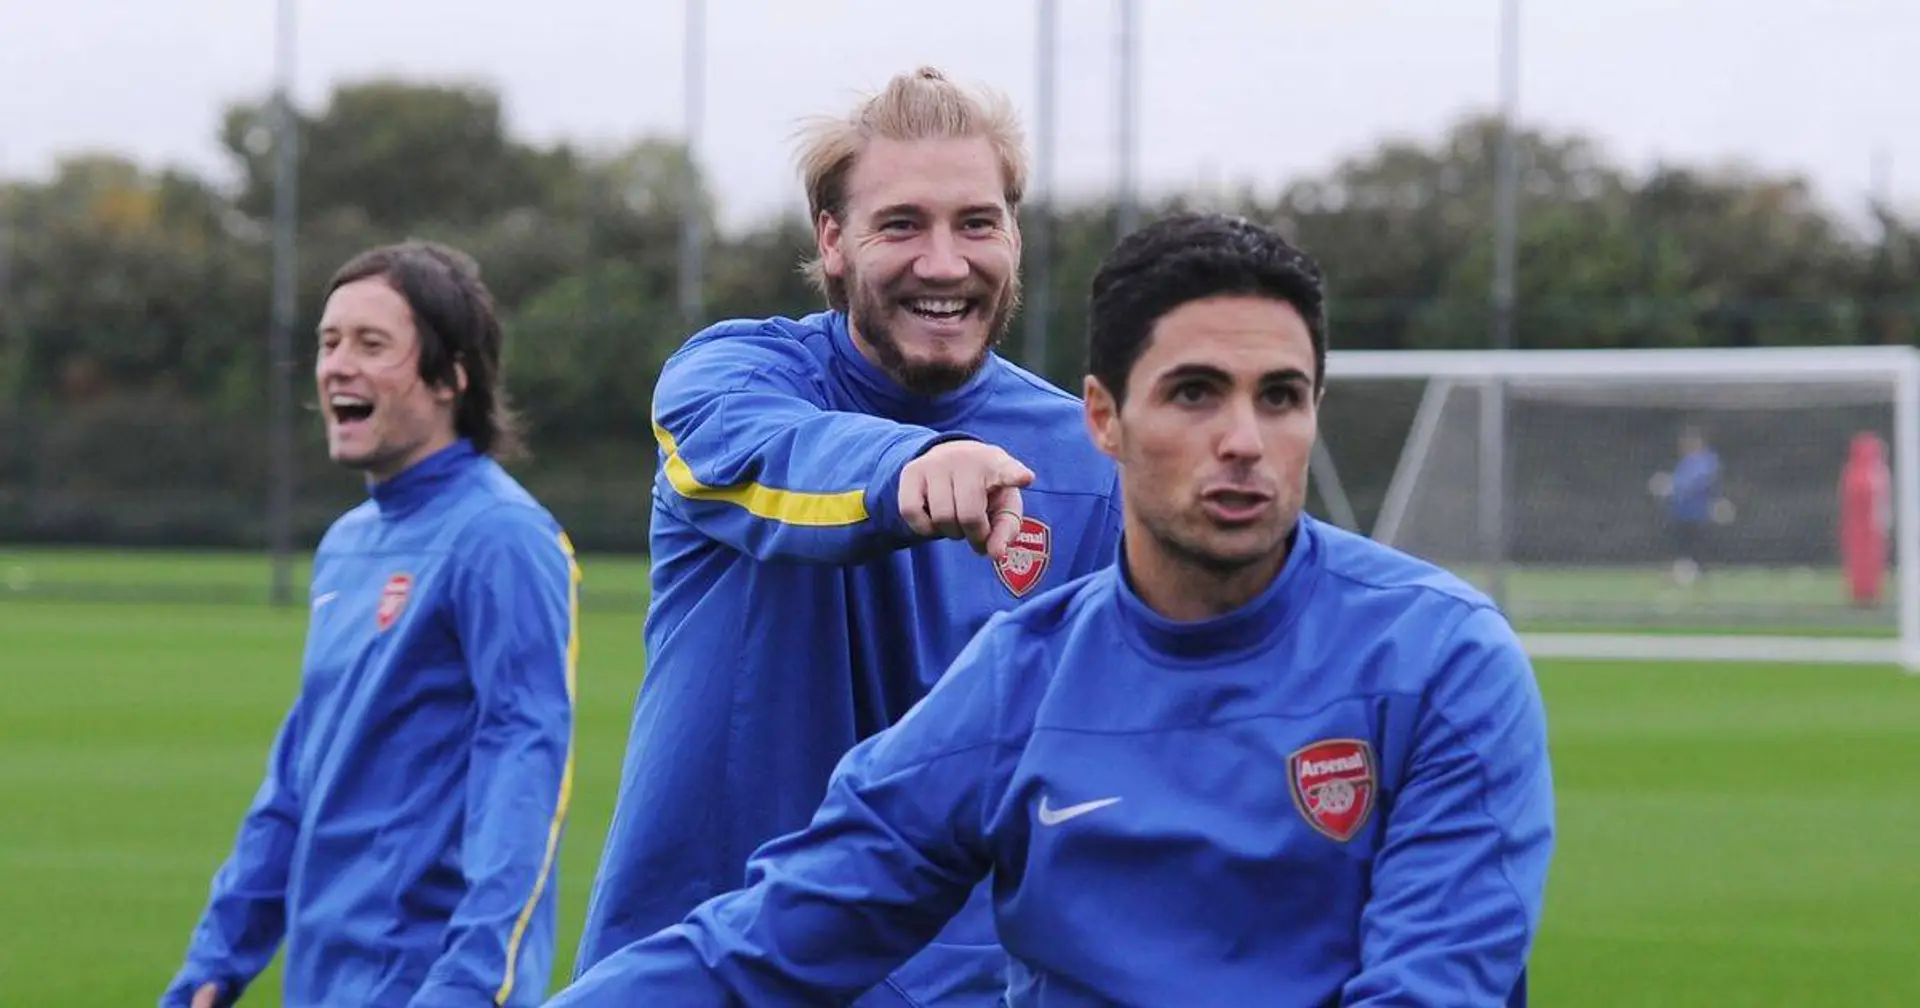 'I don’t think I’ve met many teammates with greater managerial potential': Bendtner on Arteta